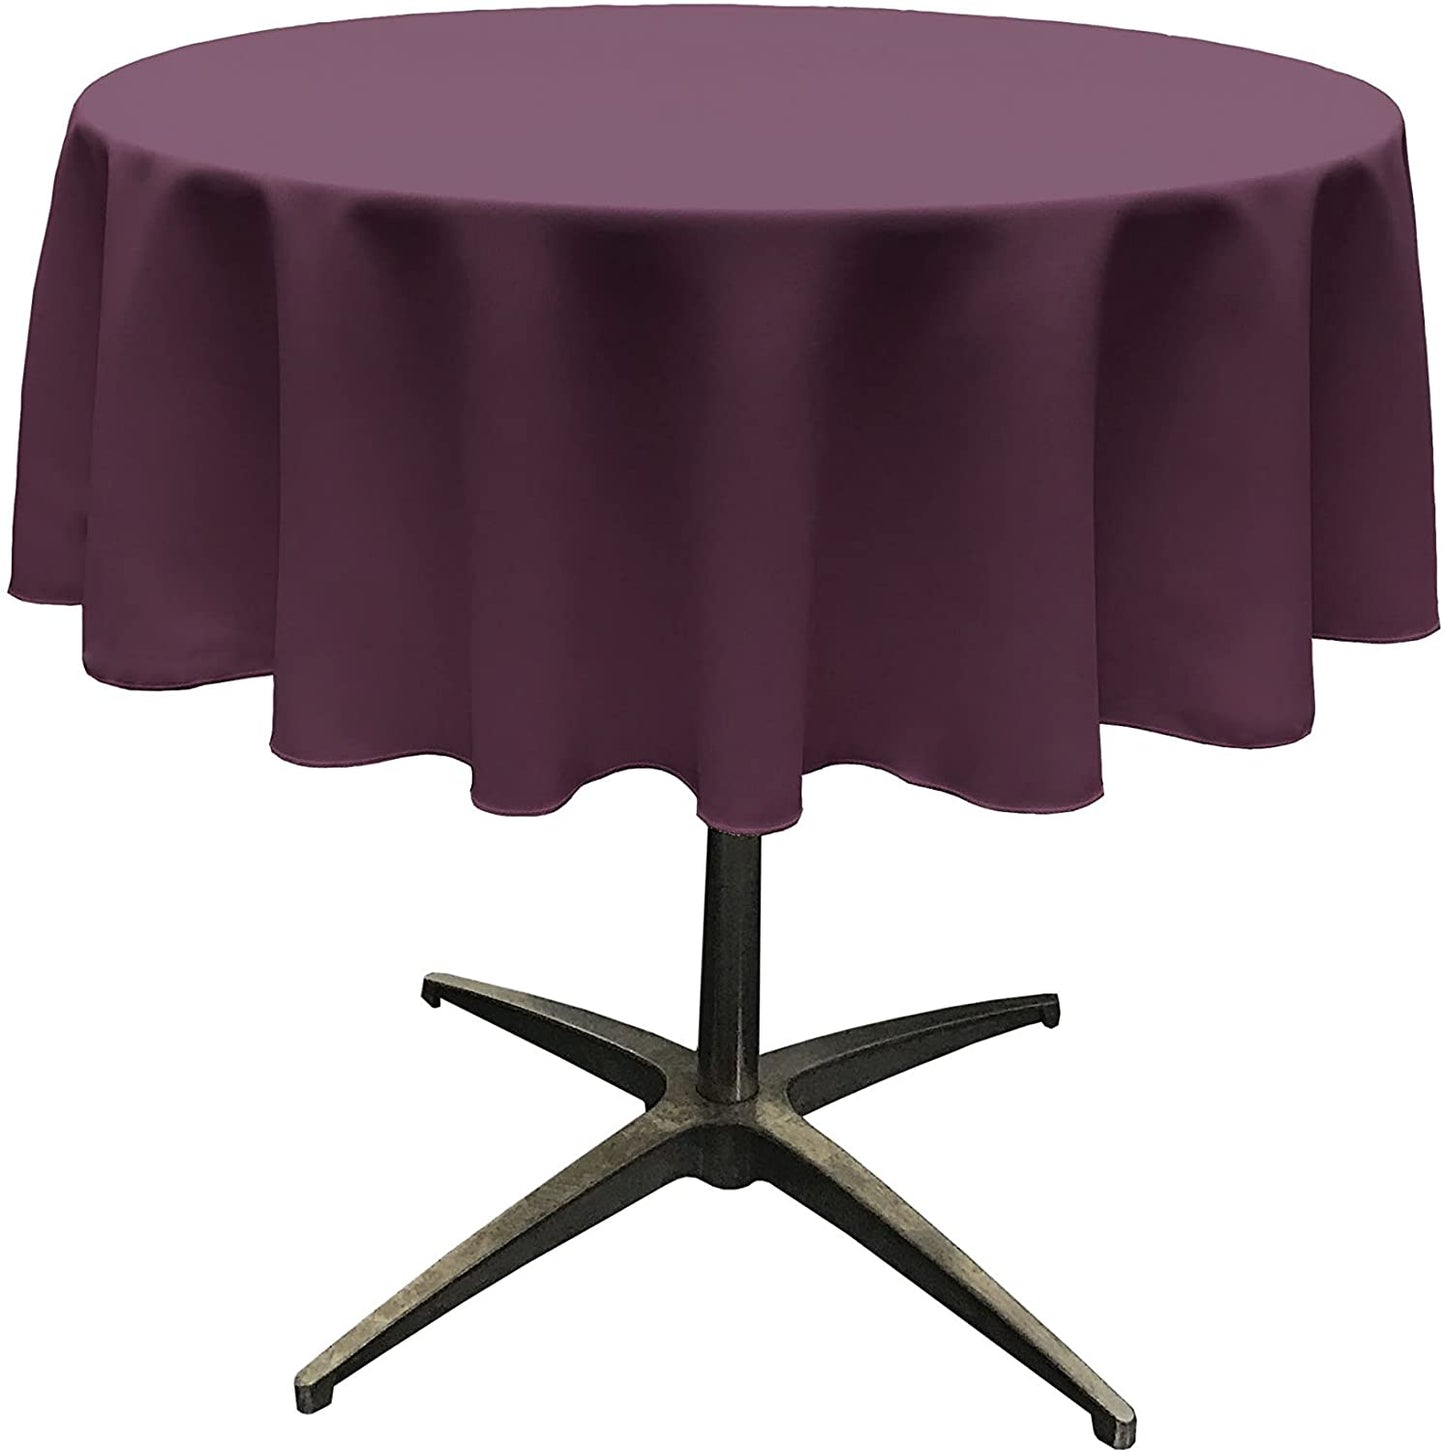 Polyester Poplin Washable Round Tablecloth, Stain and Wrinkle Resistant Table Cover Eggplant